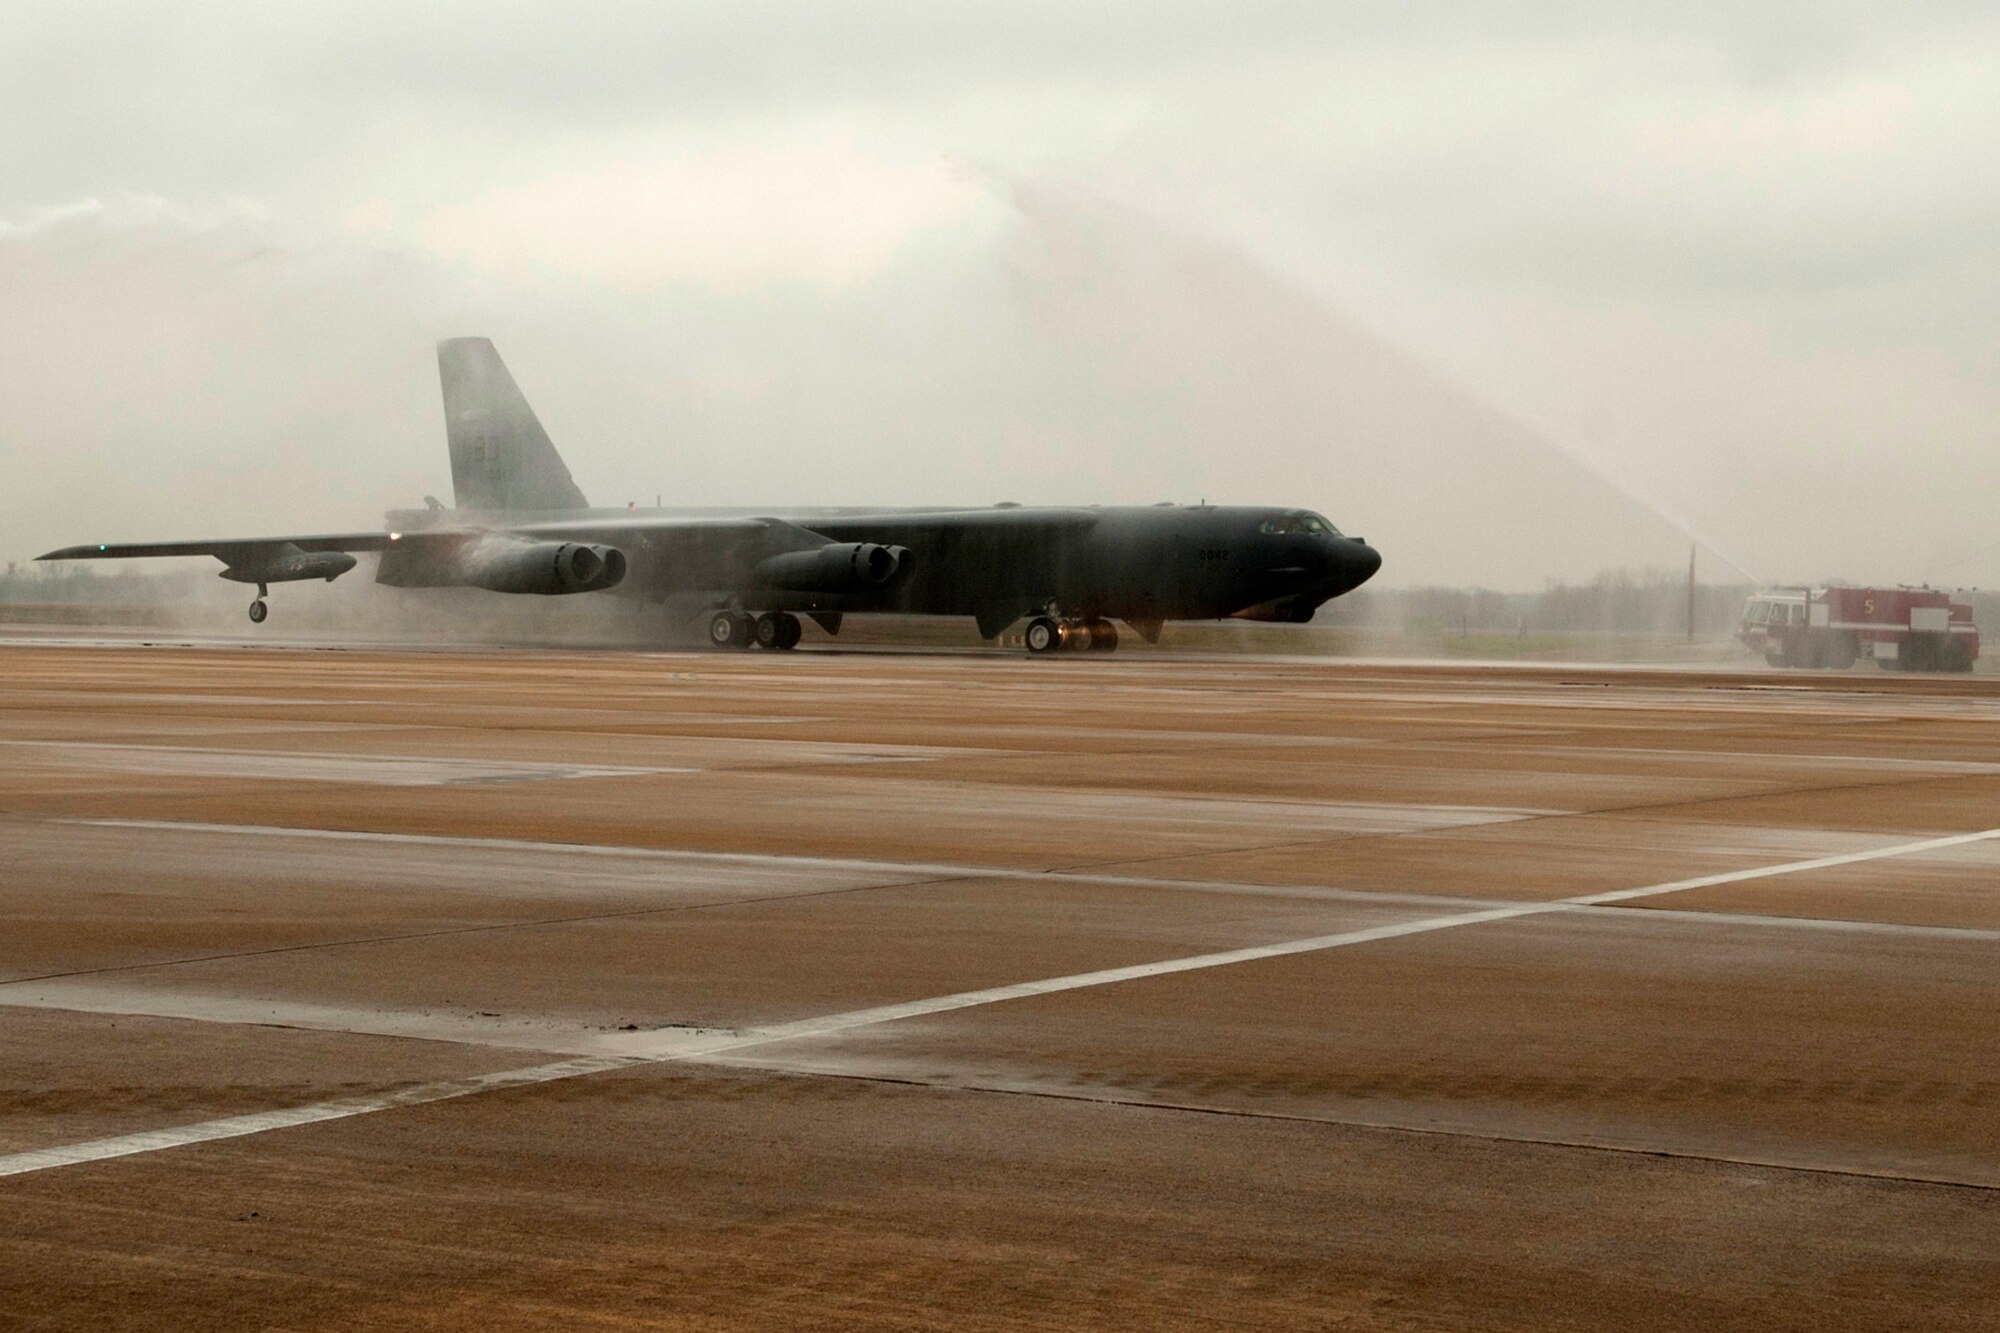 A 93rd Bomb Squadron B-52H Stratofortress carrying Brig. Gen. John Mooney III, 307th Bomb Wing commander, receives a water salute while taxiing to its parking spot after returning from a sortie, Barksdale Air Force Base, La., Feb. 10, 2012. This sortie marked the last flight for Mooney before relinquishing command of the 307th BW. (U.S. Air Force photo by Master Sgt. Greg Steele/Released)